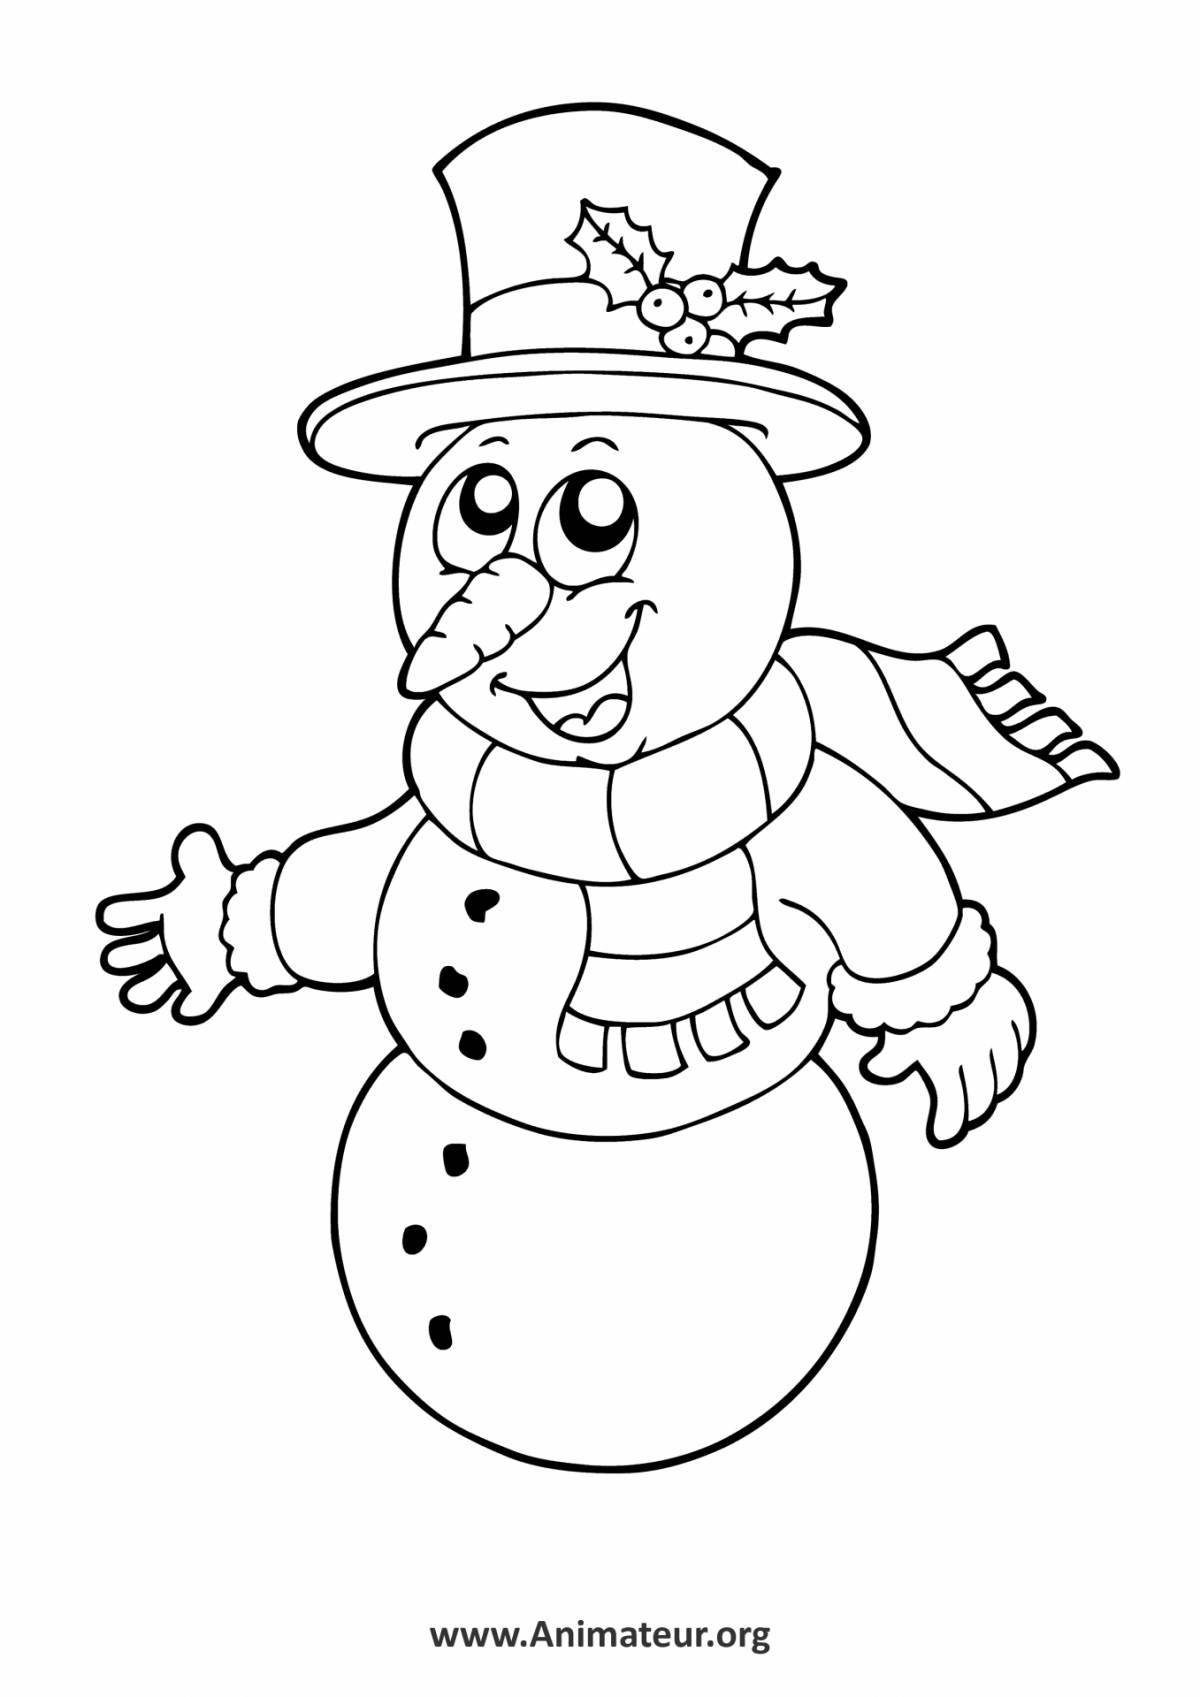 Animated snowman coloring book